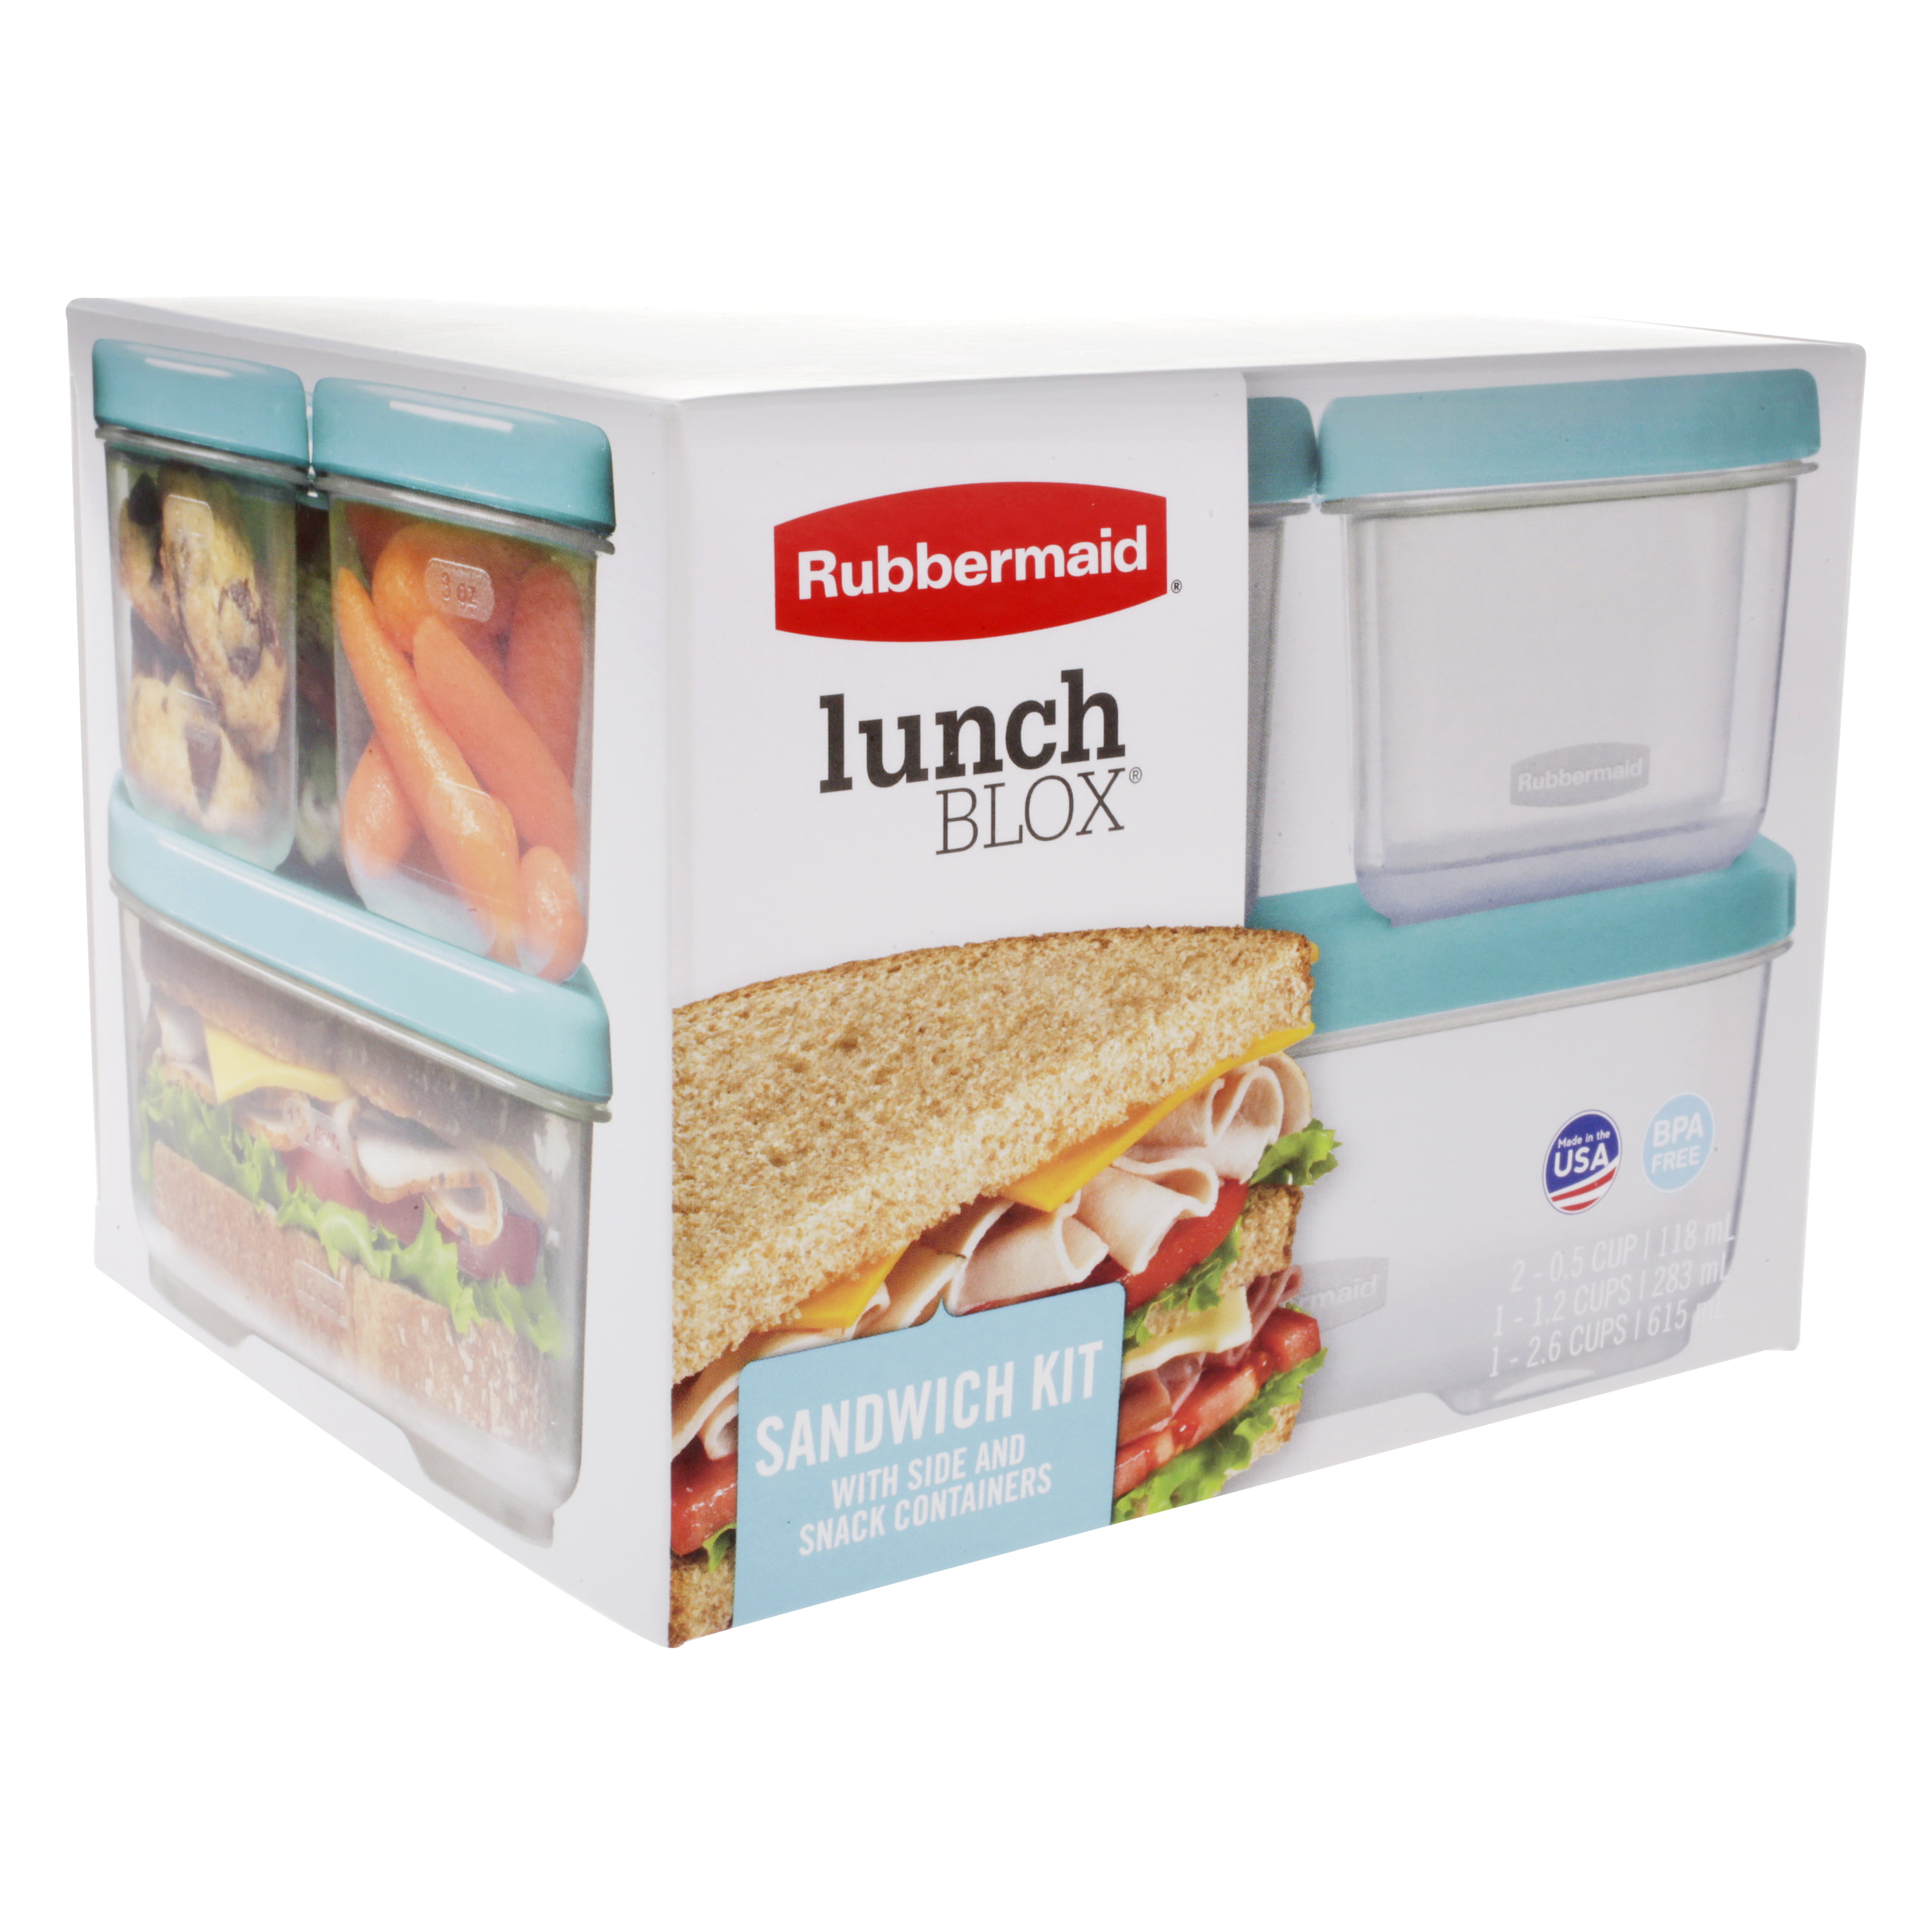 Rubbermaid Lunch Box Personal Cooler Food Picnic Camping 6 Pack